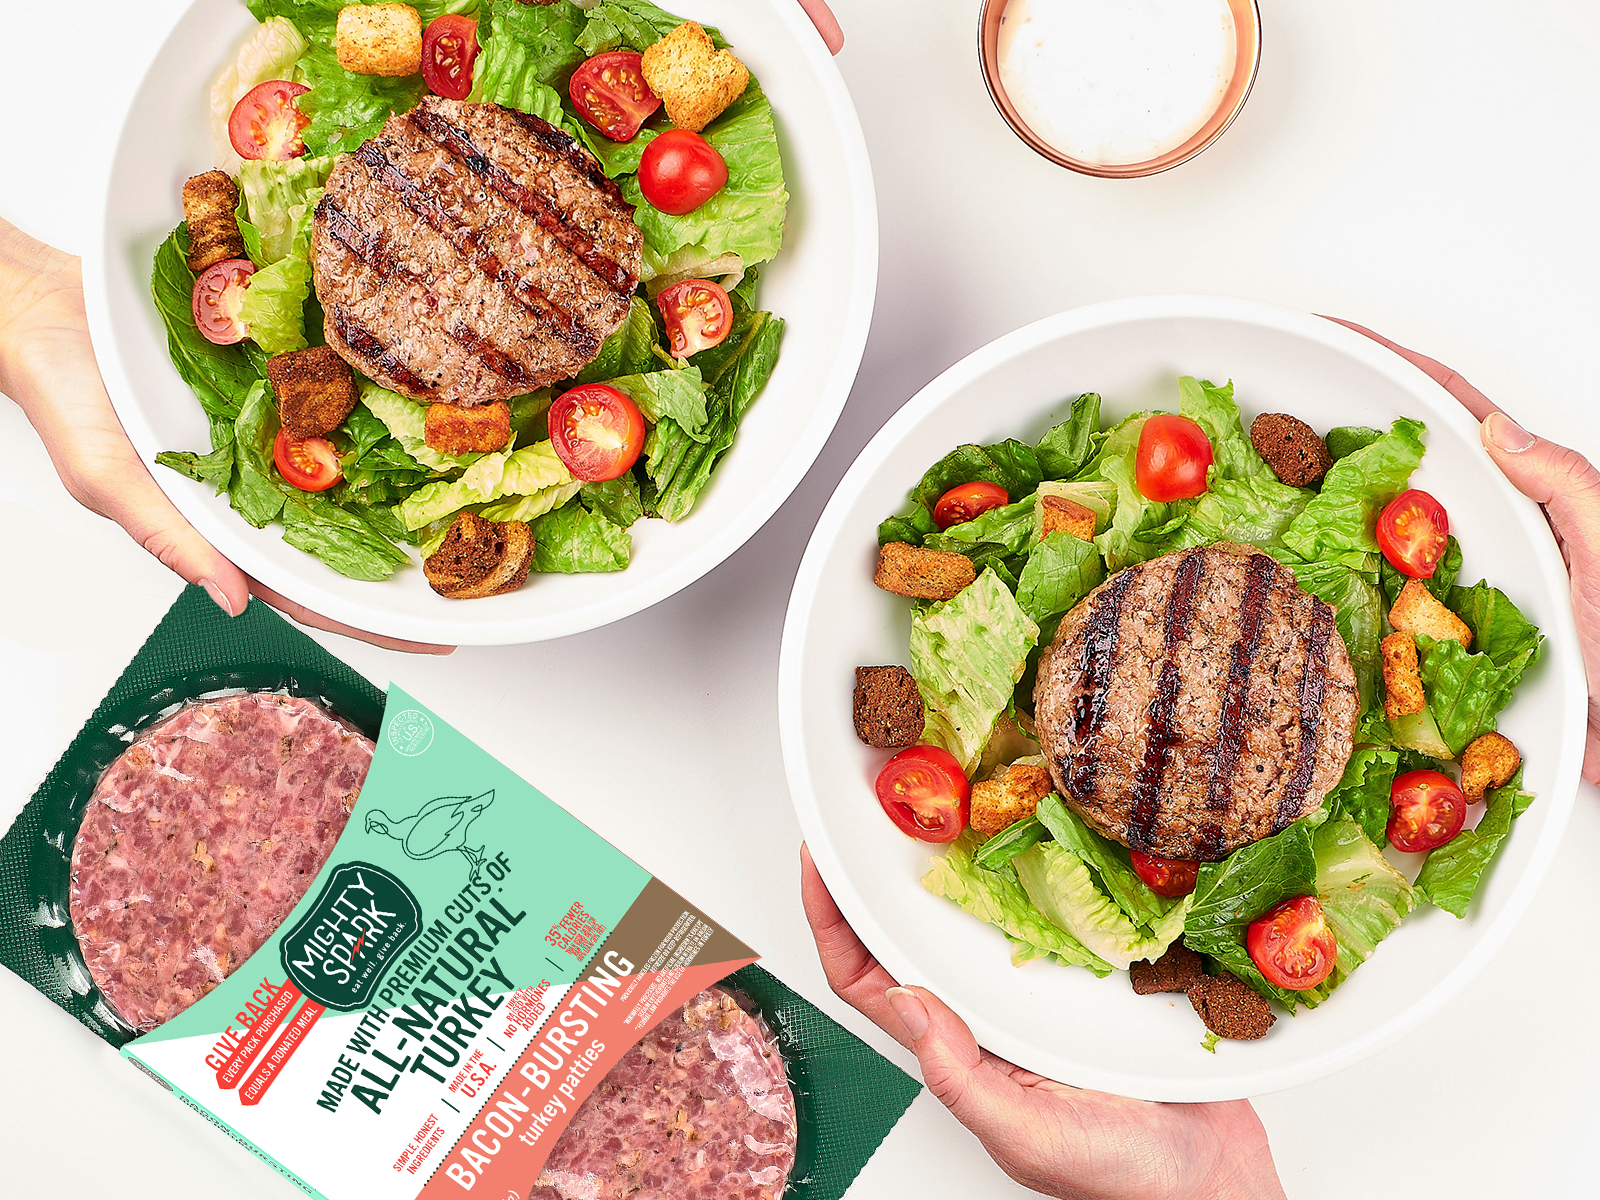 Take Advantage Of A Great Deal On Mighty Spark Chicken & Turkey Patties- Buy One, Get One FREE At Publix! on I Heart Publix 1